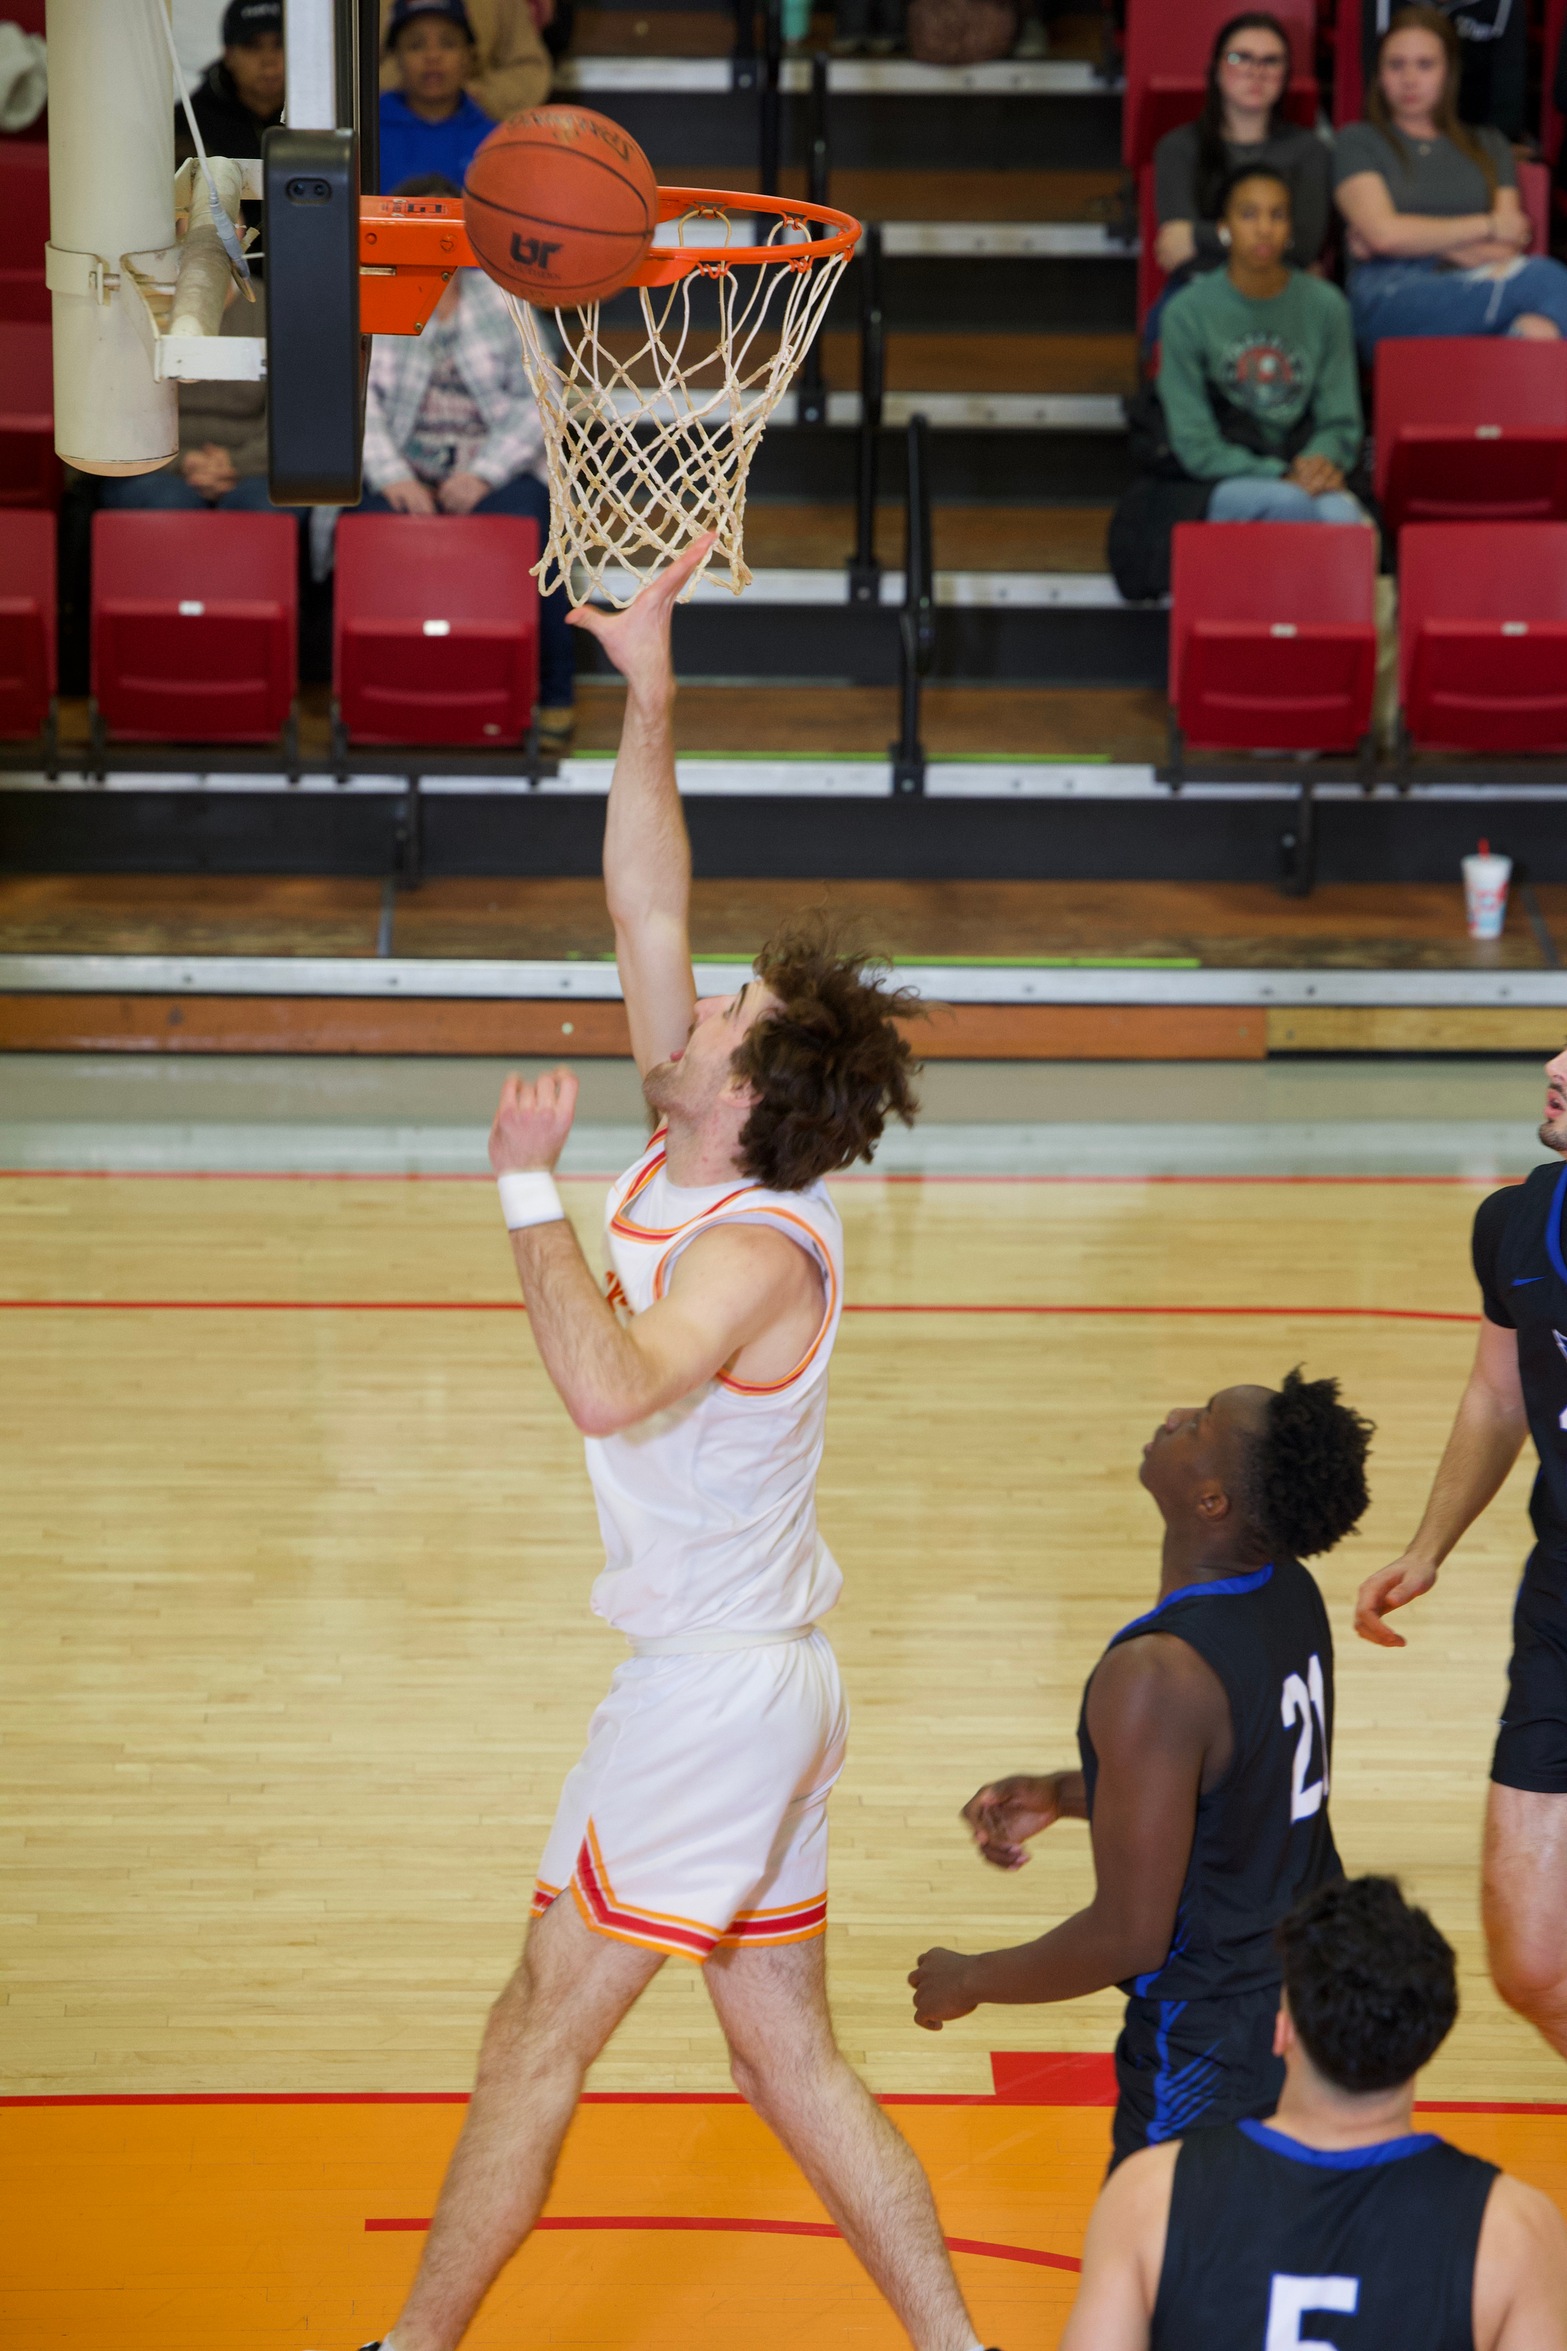 Sivley’s Double-Double Powers No. 7 UT Southern Past Toppers